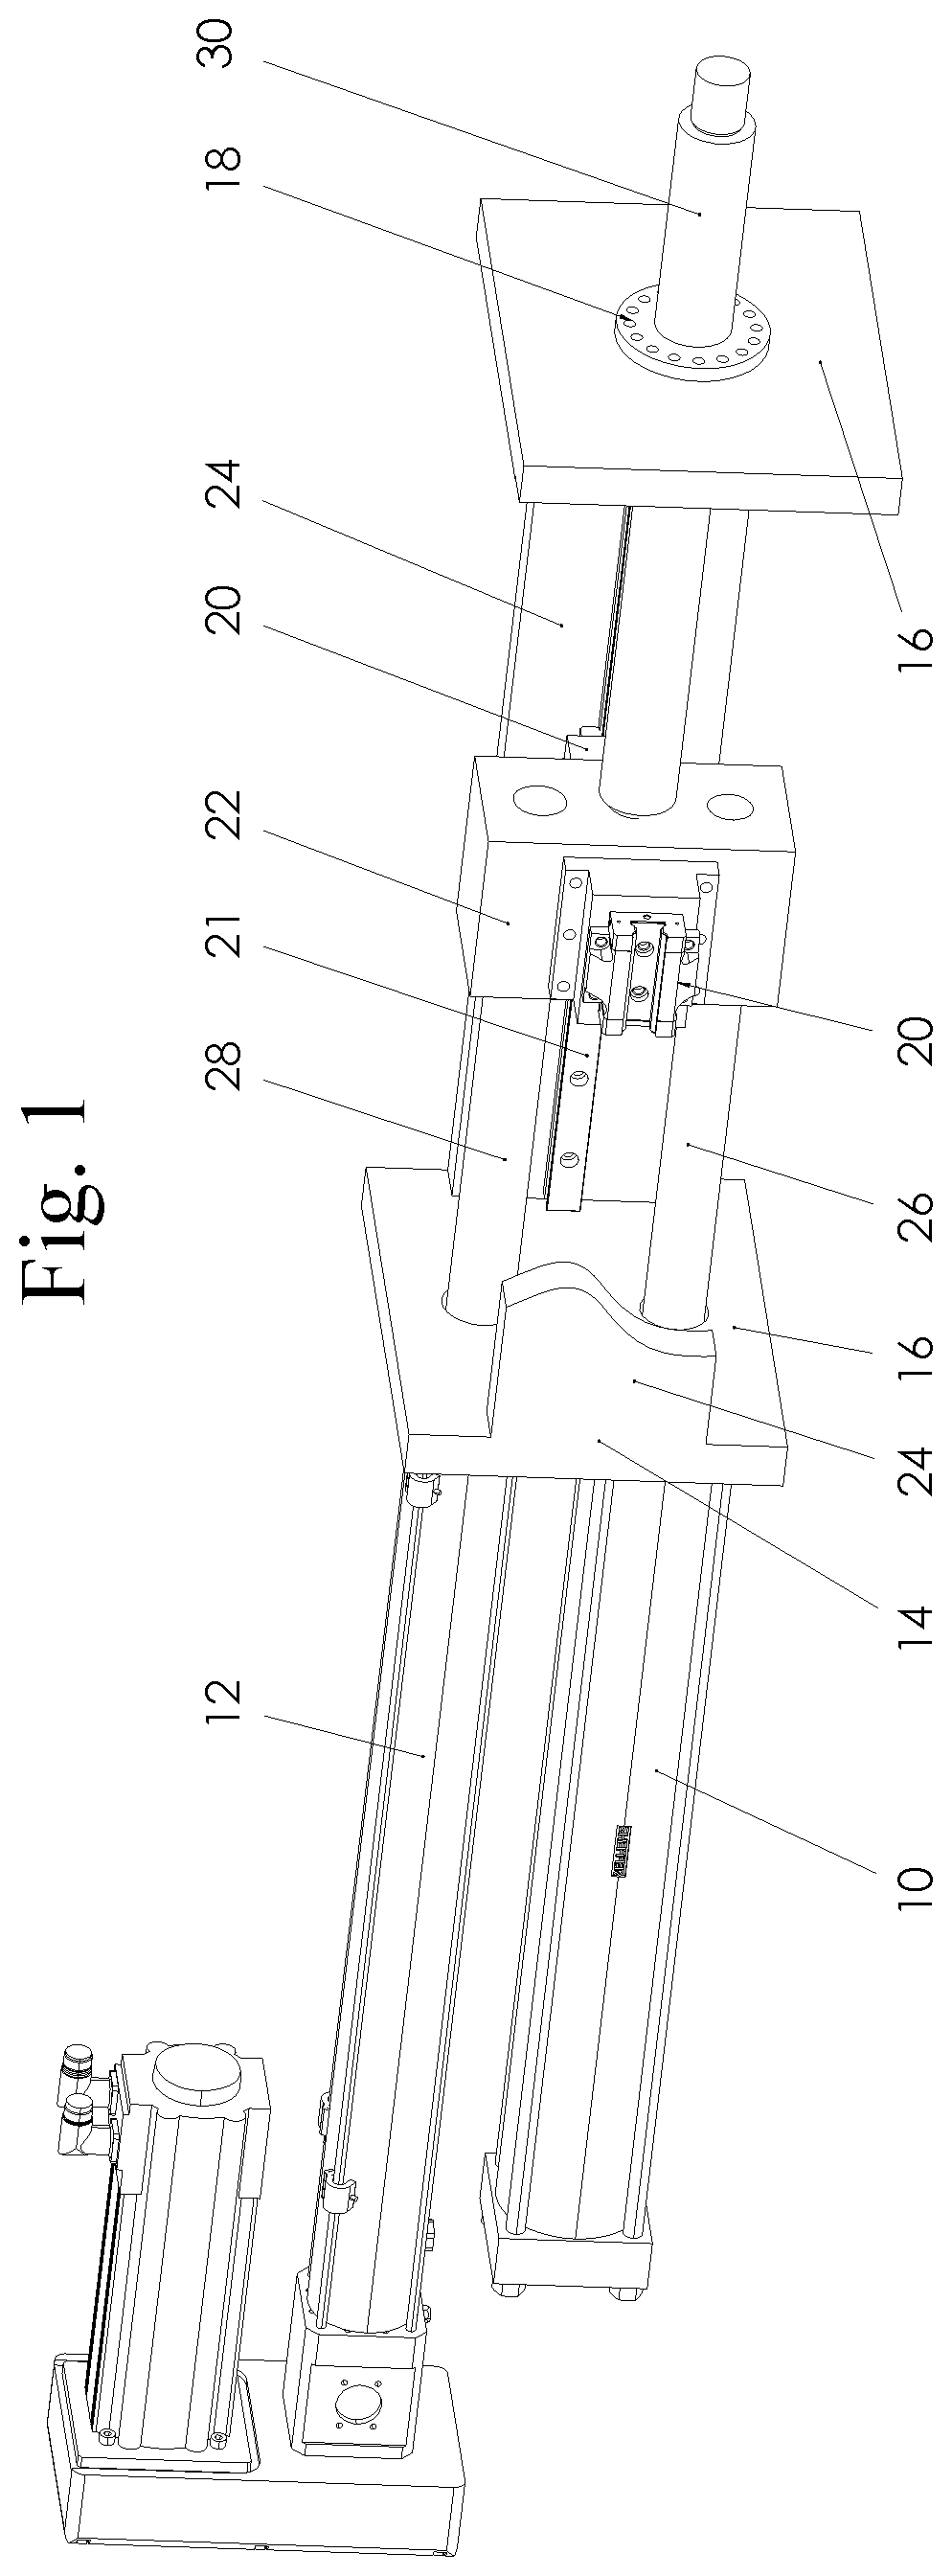 Space-constrained hybrid linear actuator